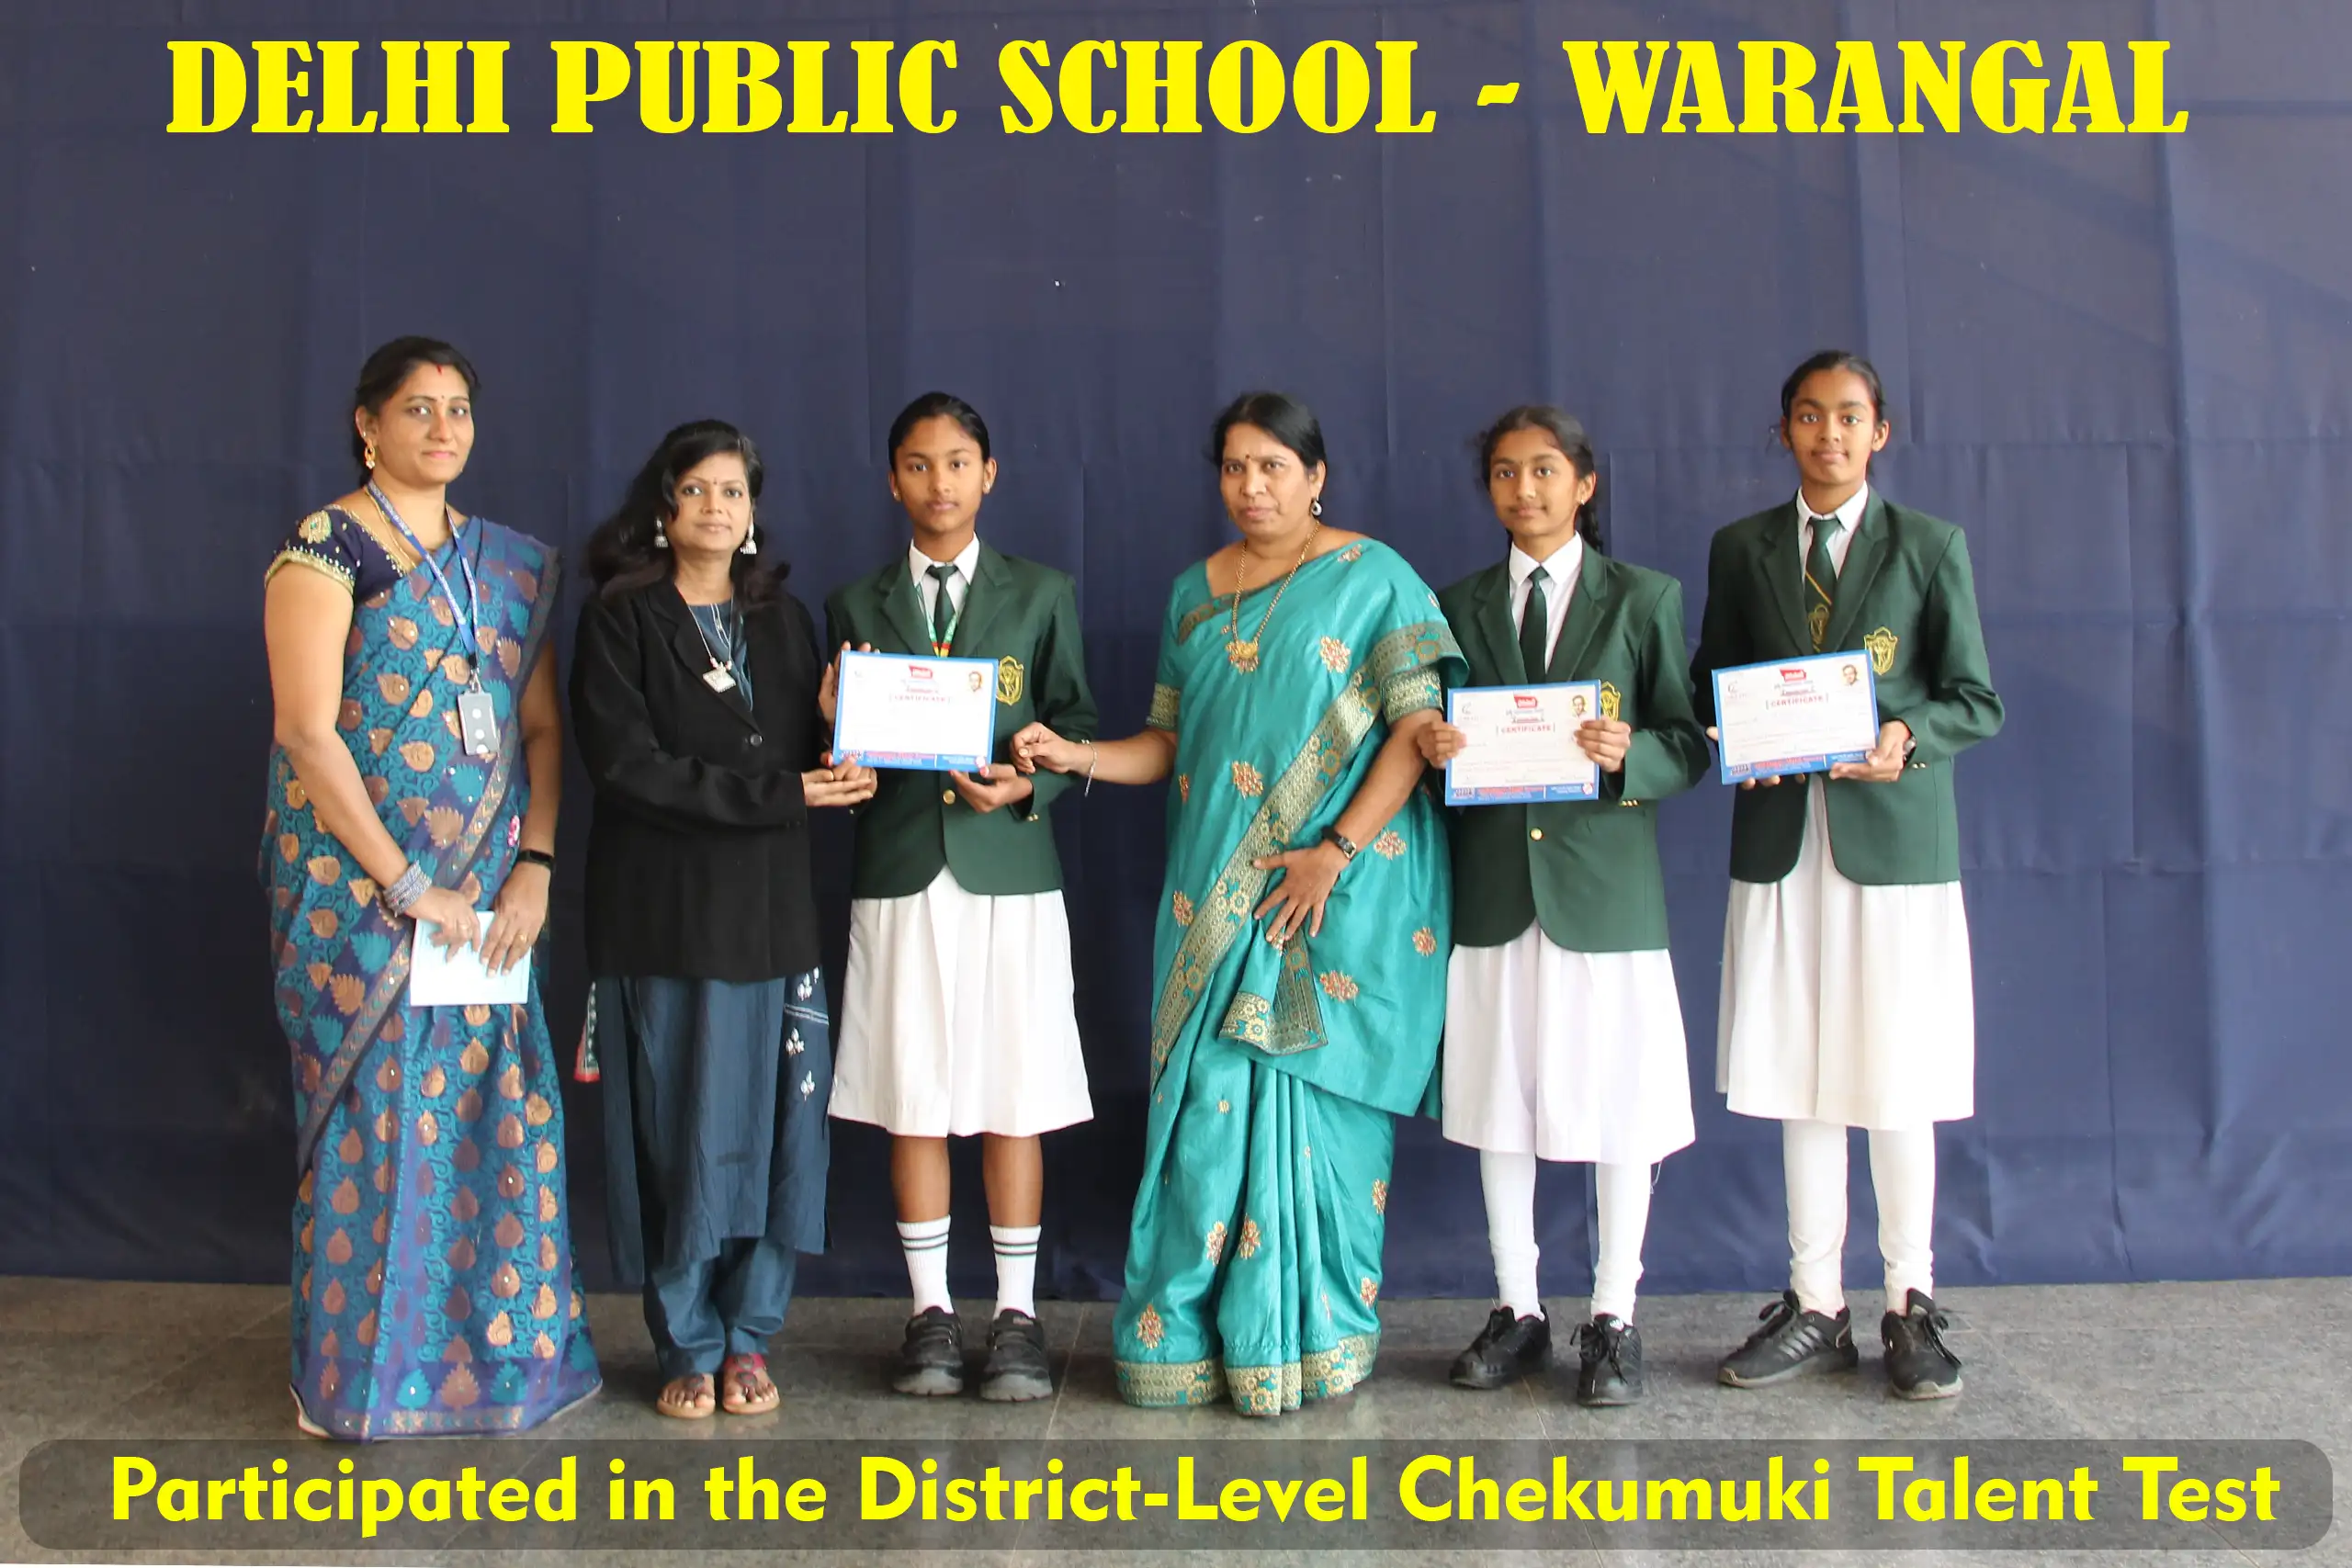 Students of DPS Warangal receiving certificate from the teachers